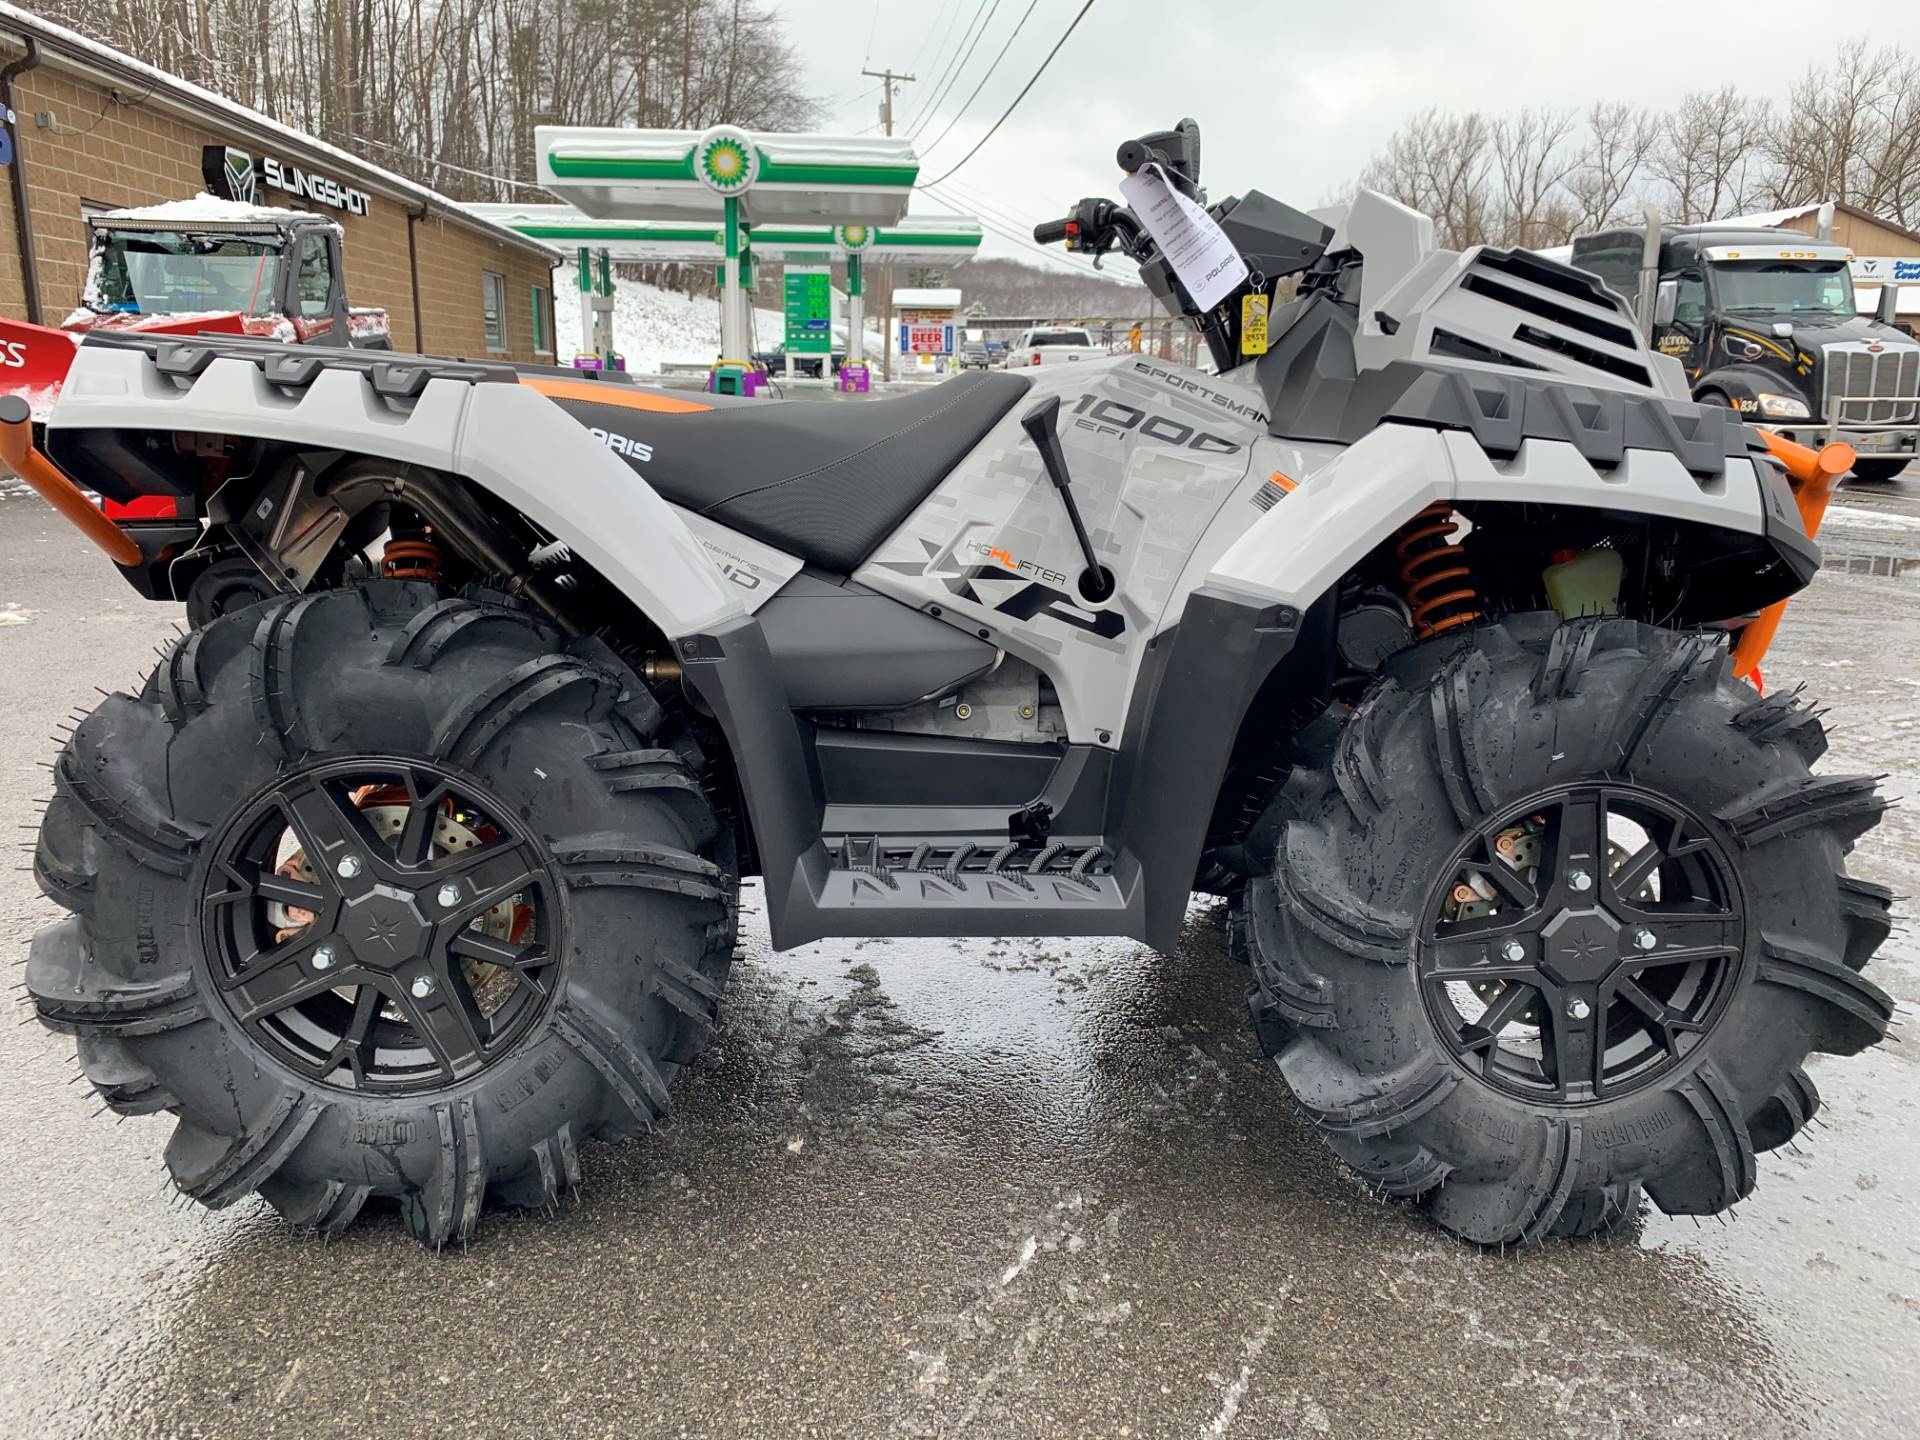 Polaris Sportsman XP 1000 High Lifter, Off-road adventure, Power and performance, Exciting ride, 1920x1440 HD Desktop